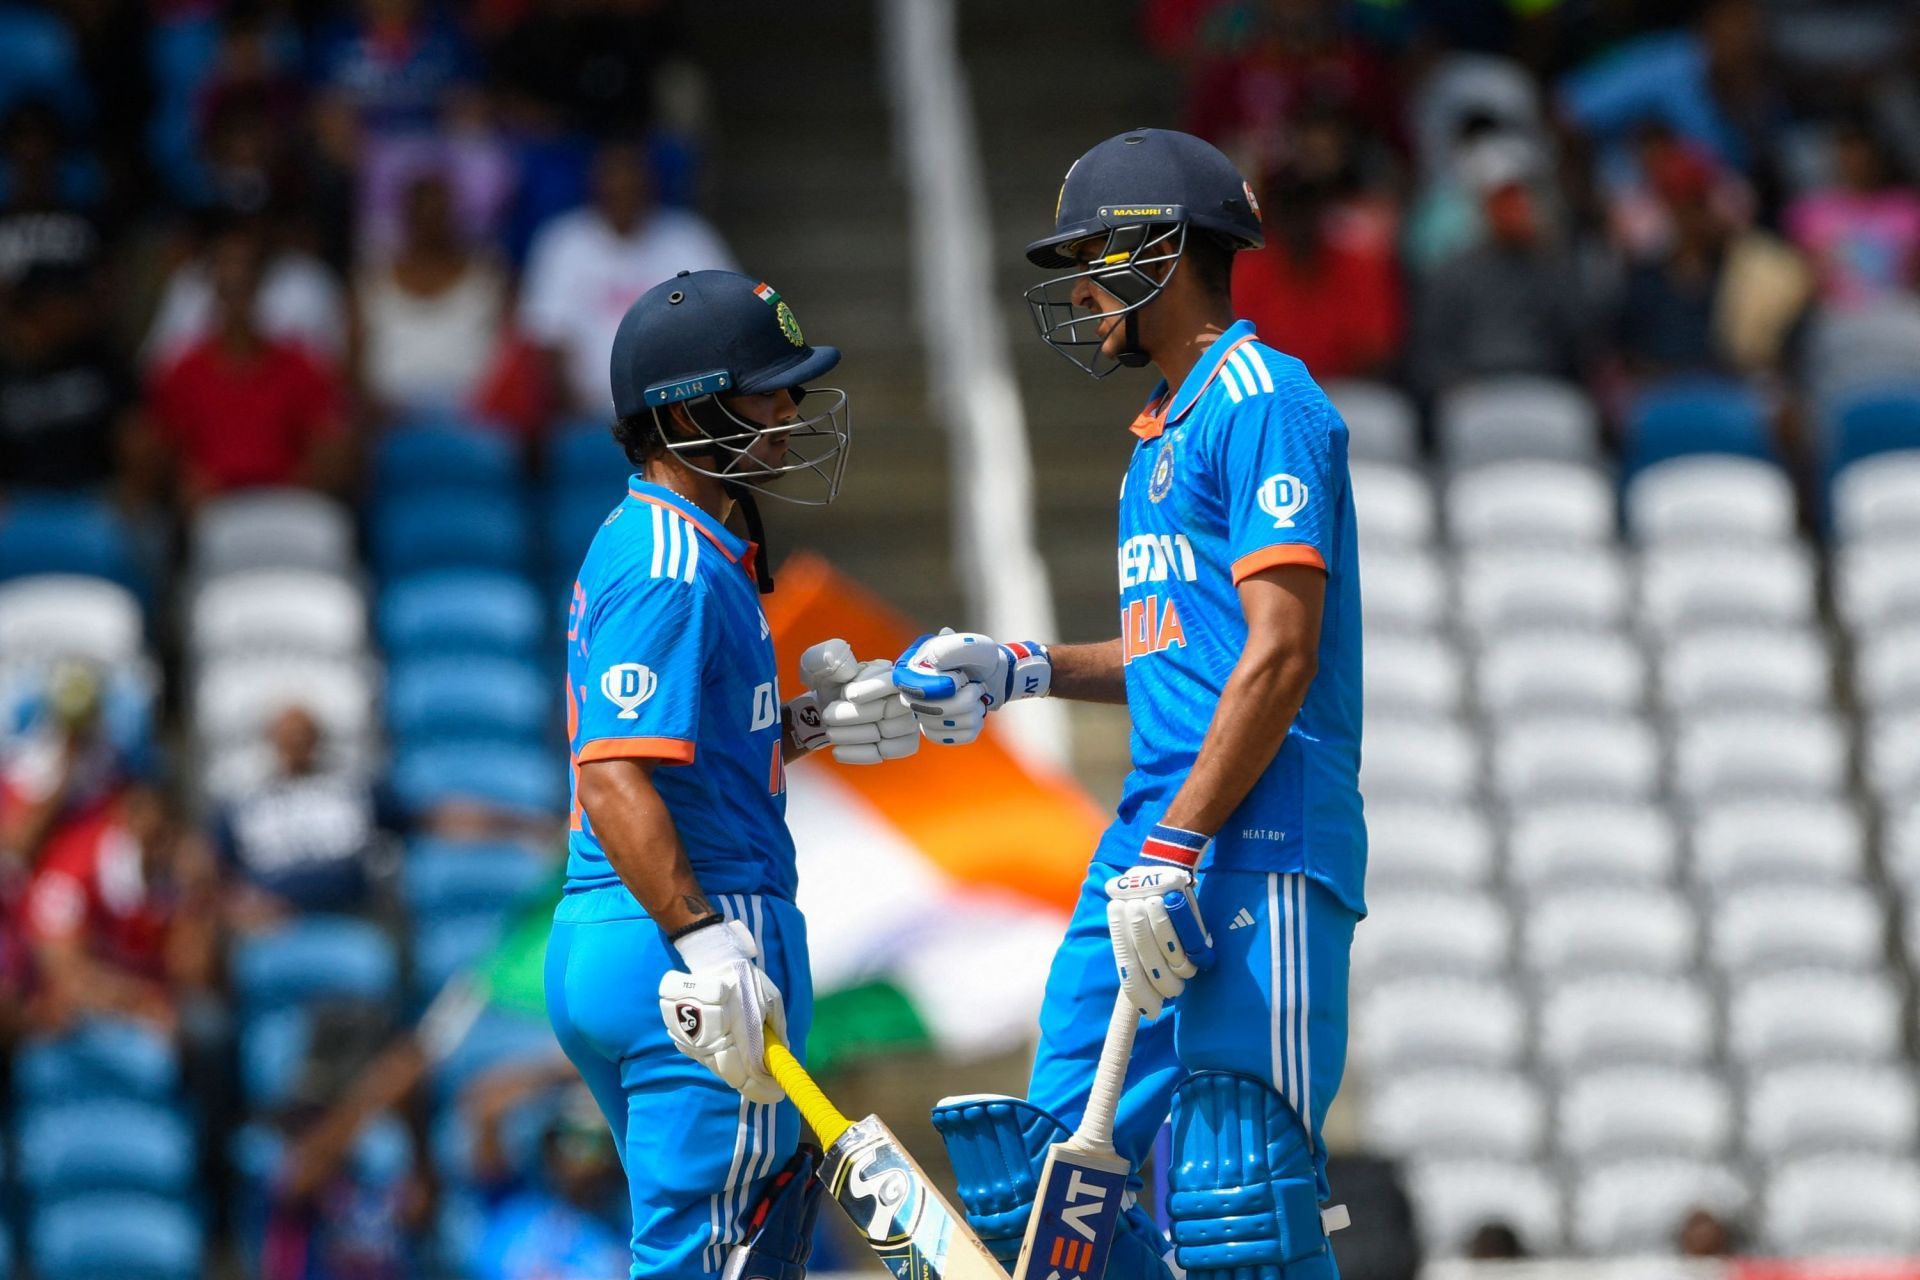 Ishan Kishan and Shubman Gill have not been able to give India a decent start. [P/C: BCCI]